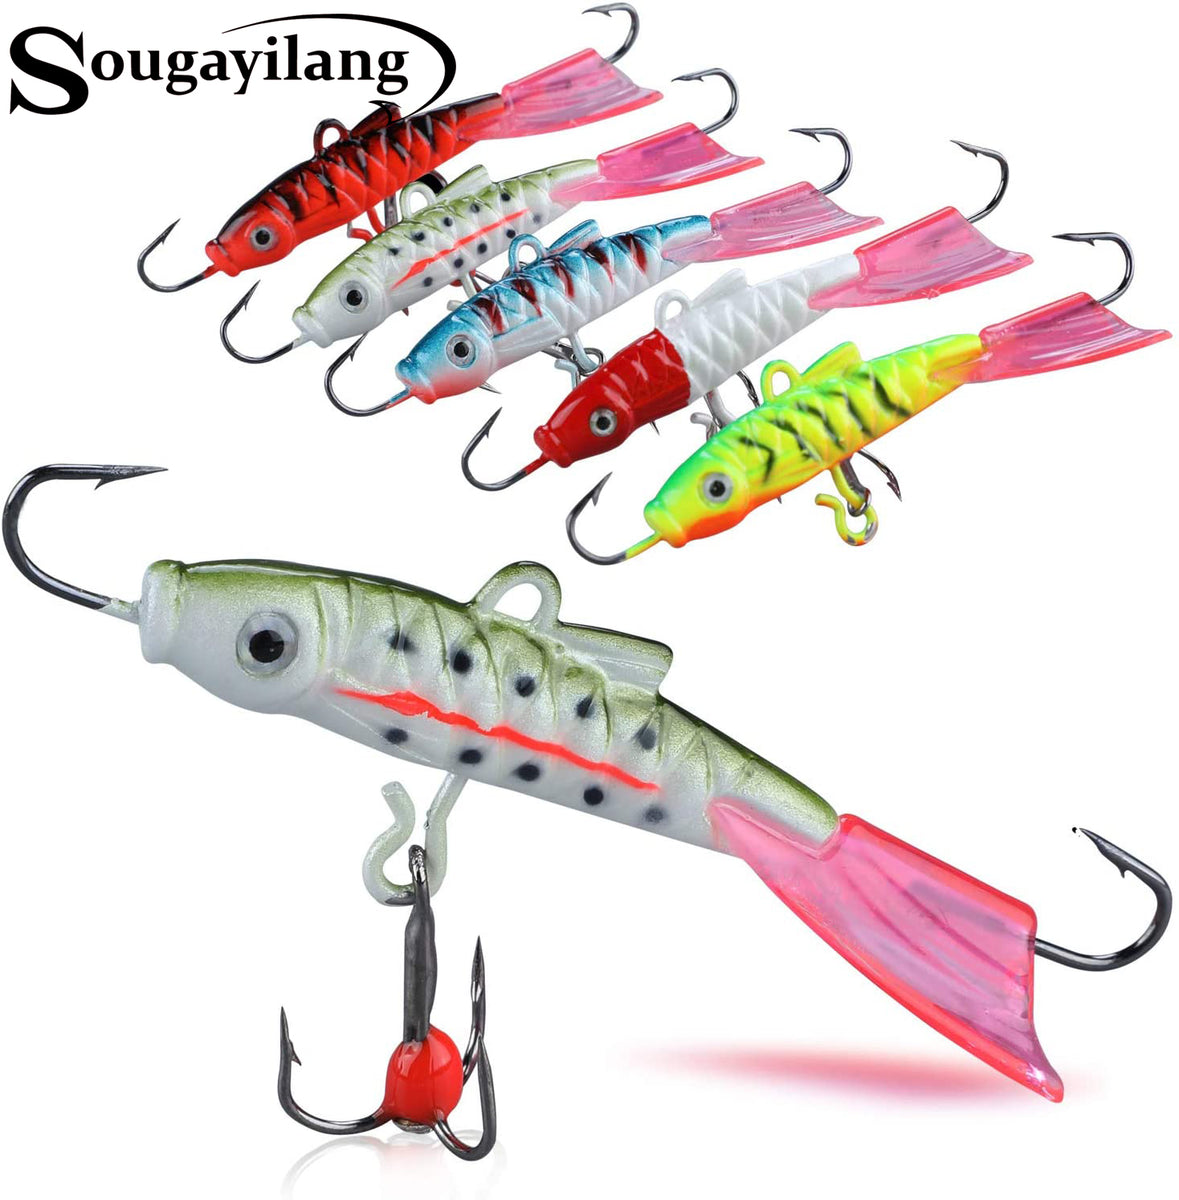 Sougayilang Ice Fishing Jigs, Winter Fishing Hard Lures with Treble Hooks,  Red, Colors Fishing Bait Lure Kit in Tackle Box for Bass Pike Trout Walleye